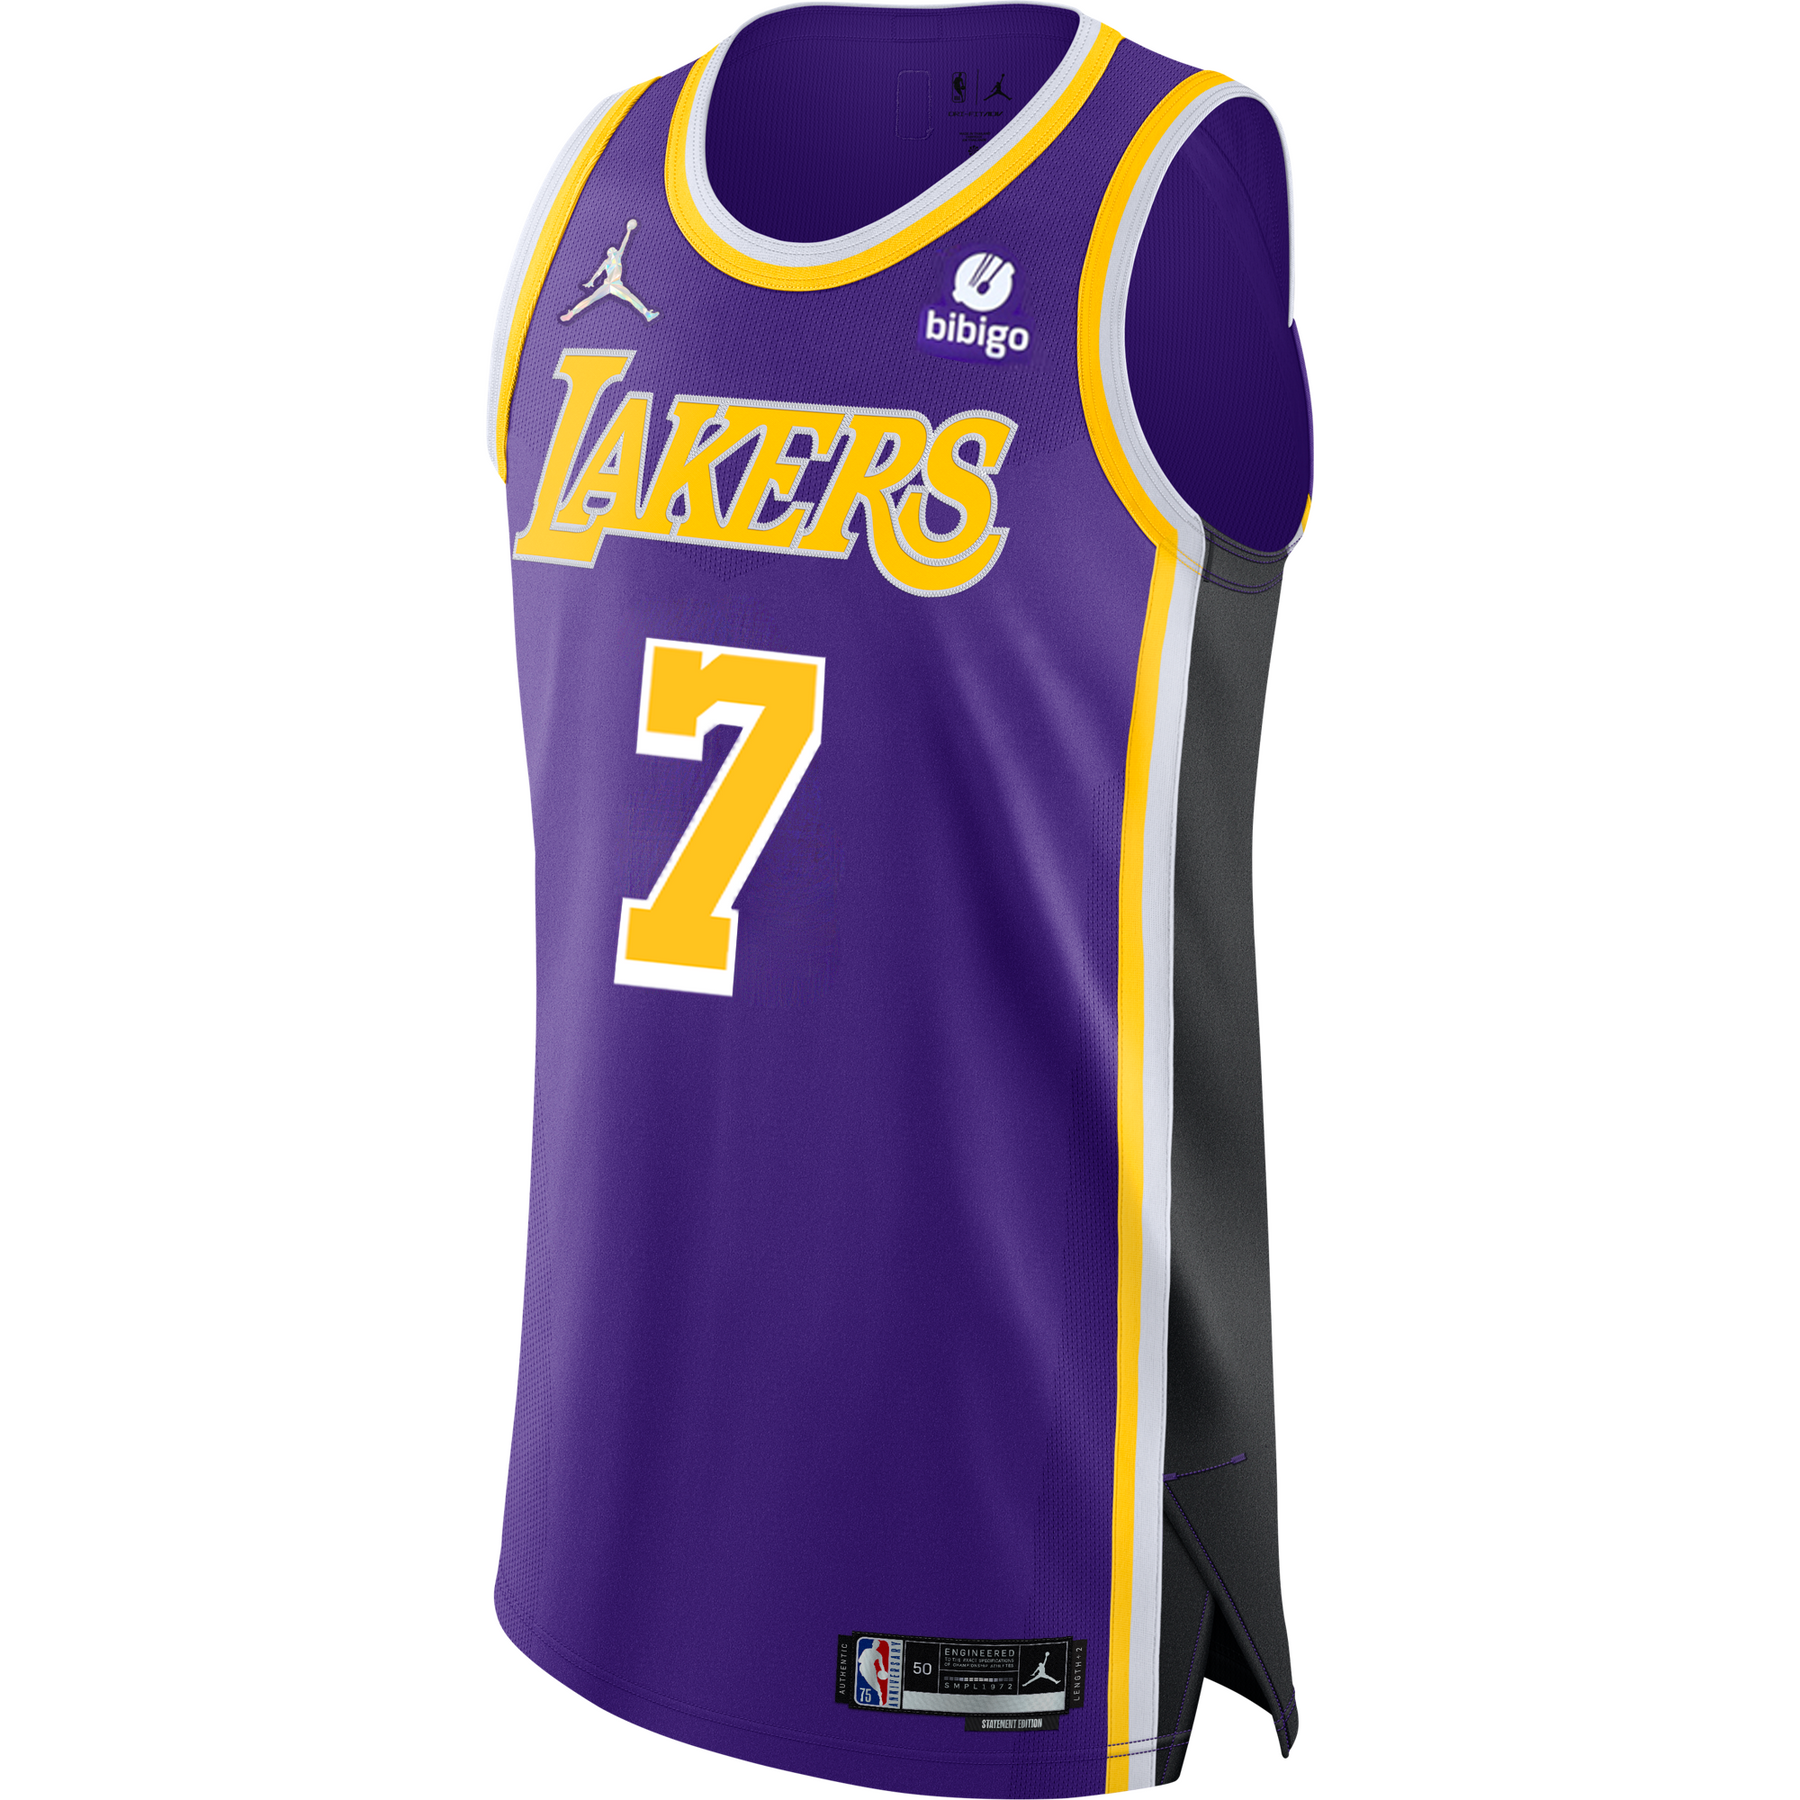 lakers 7 jersey